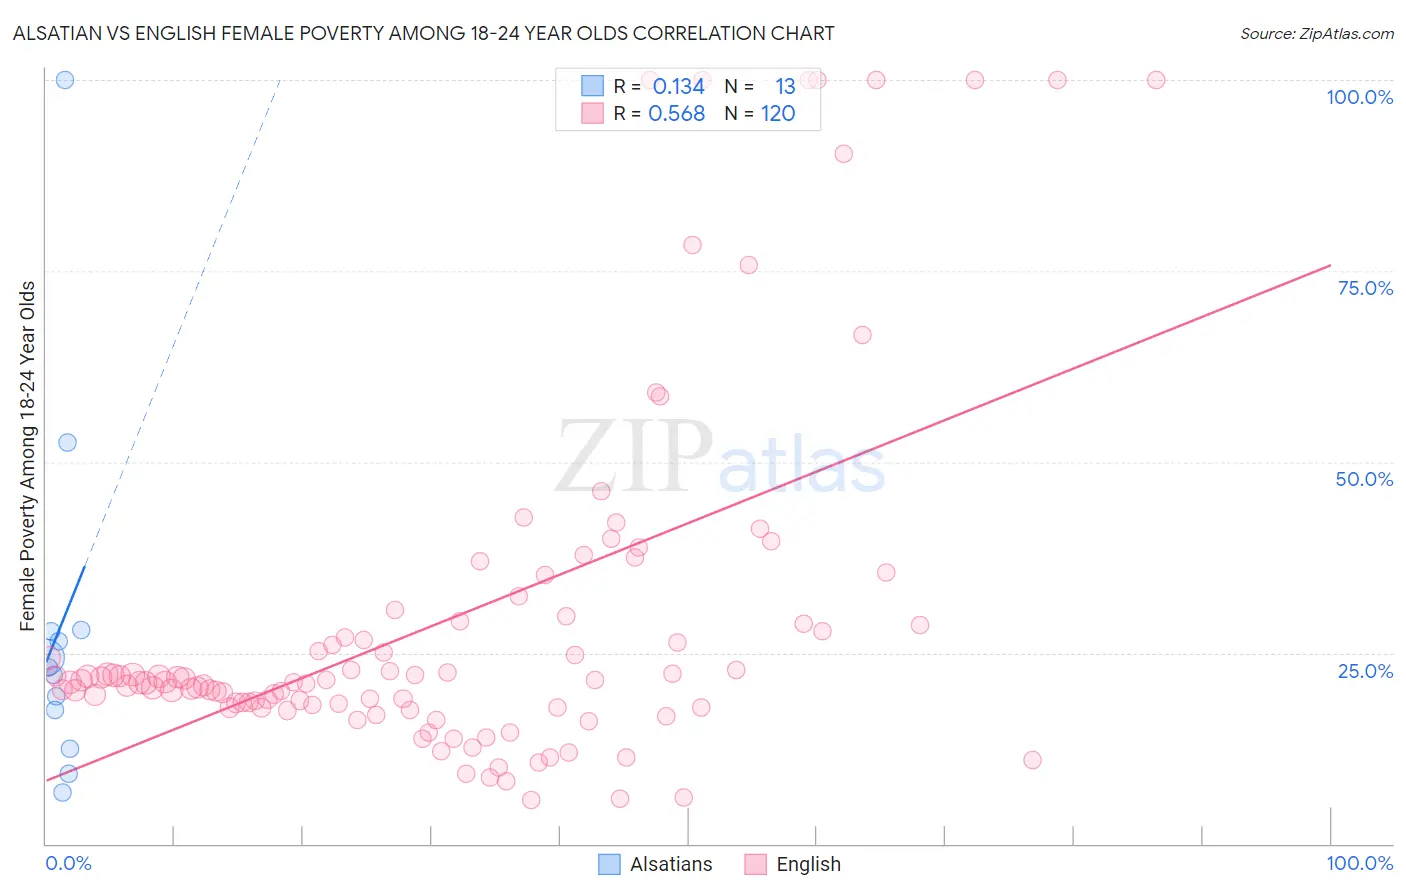 Alsatian vs English Female Poverty Among 18-24 Year Olds